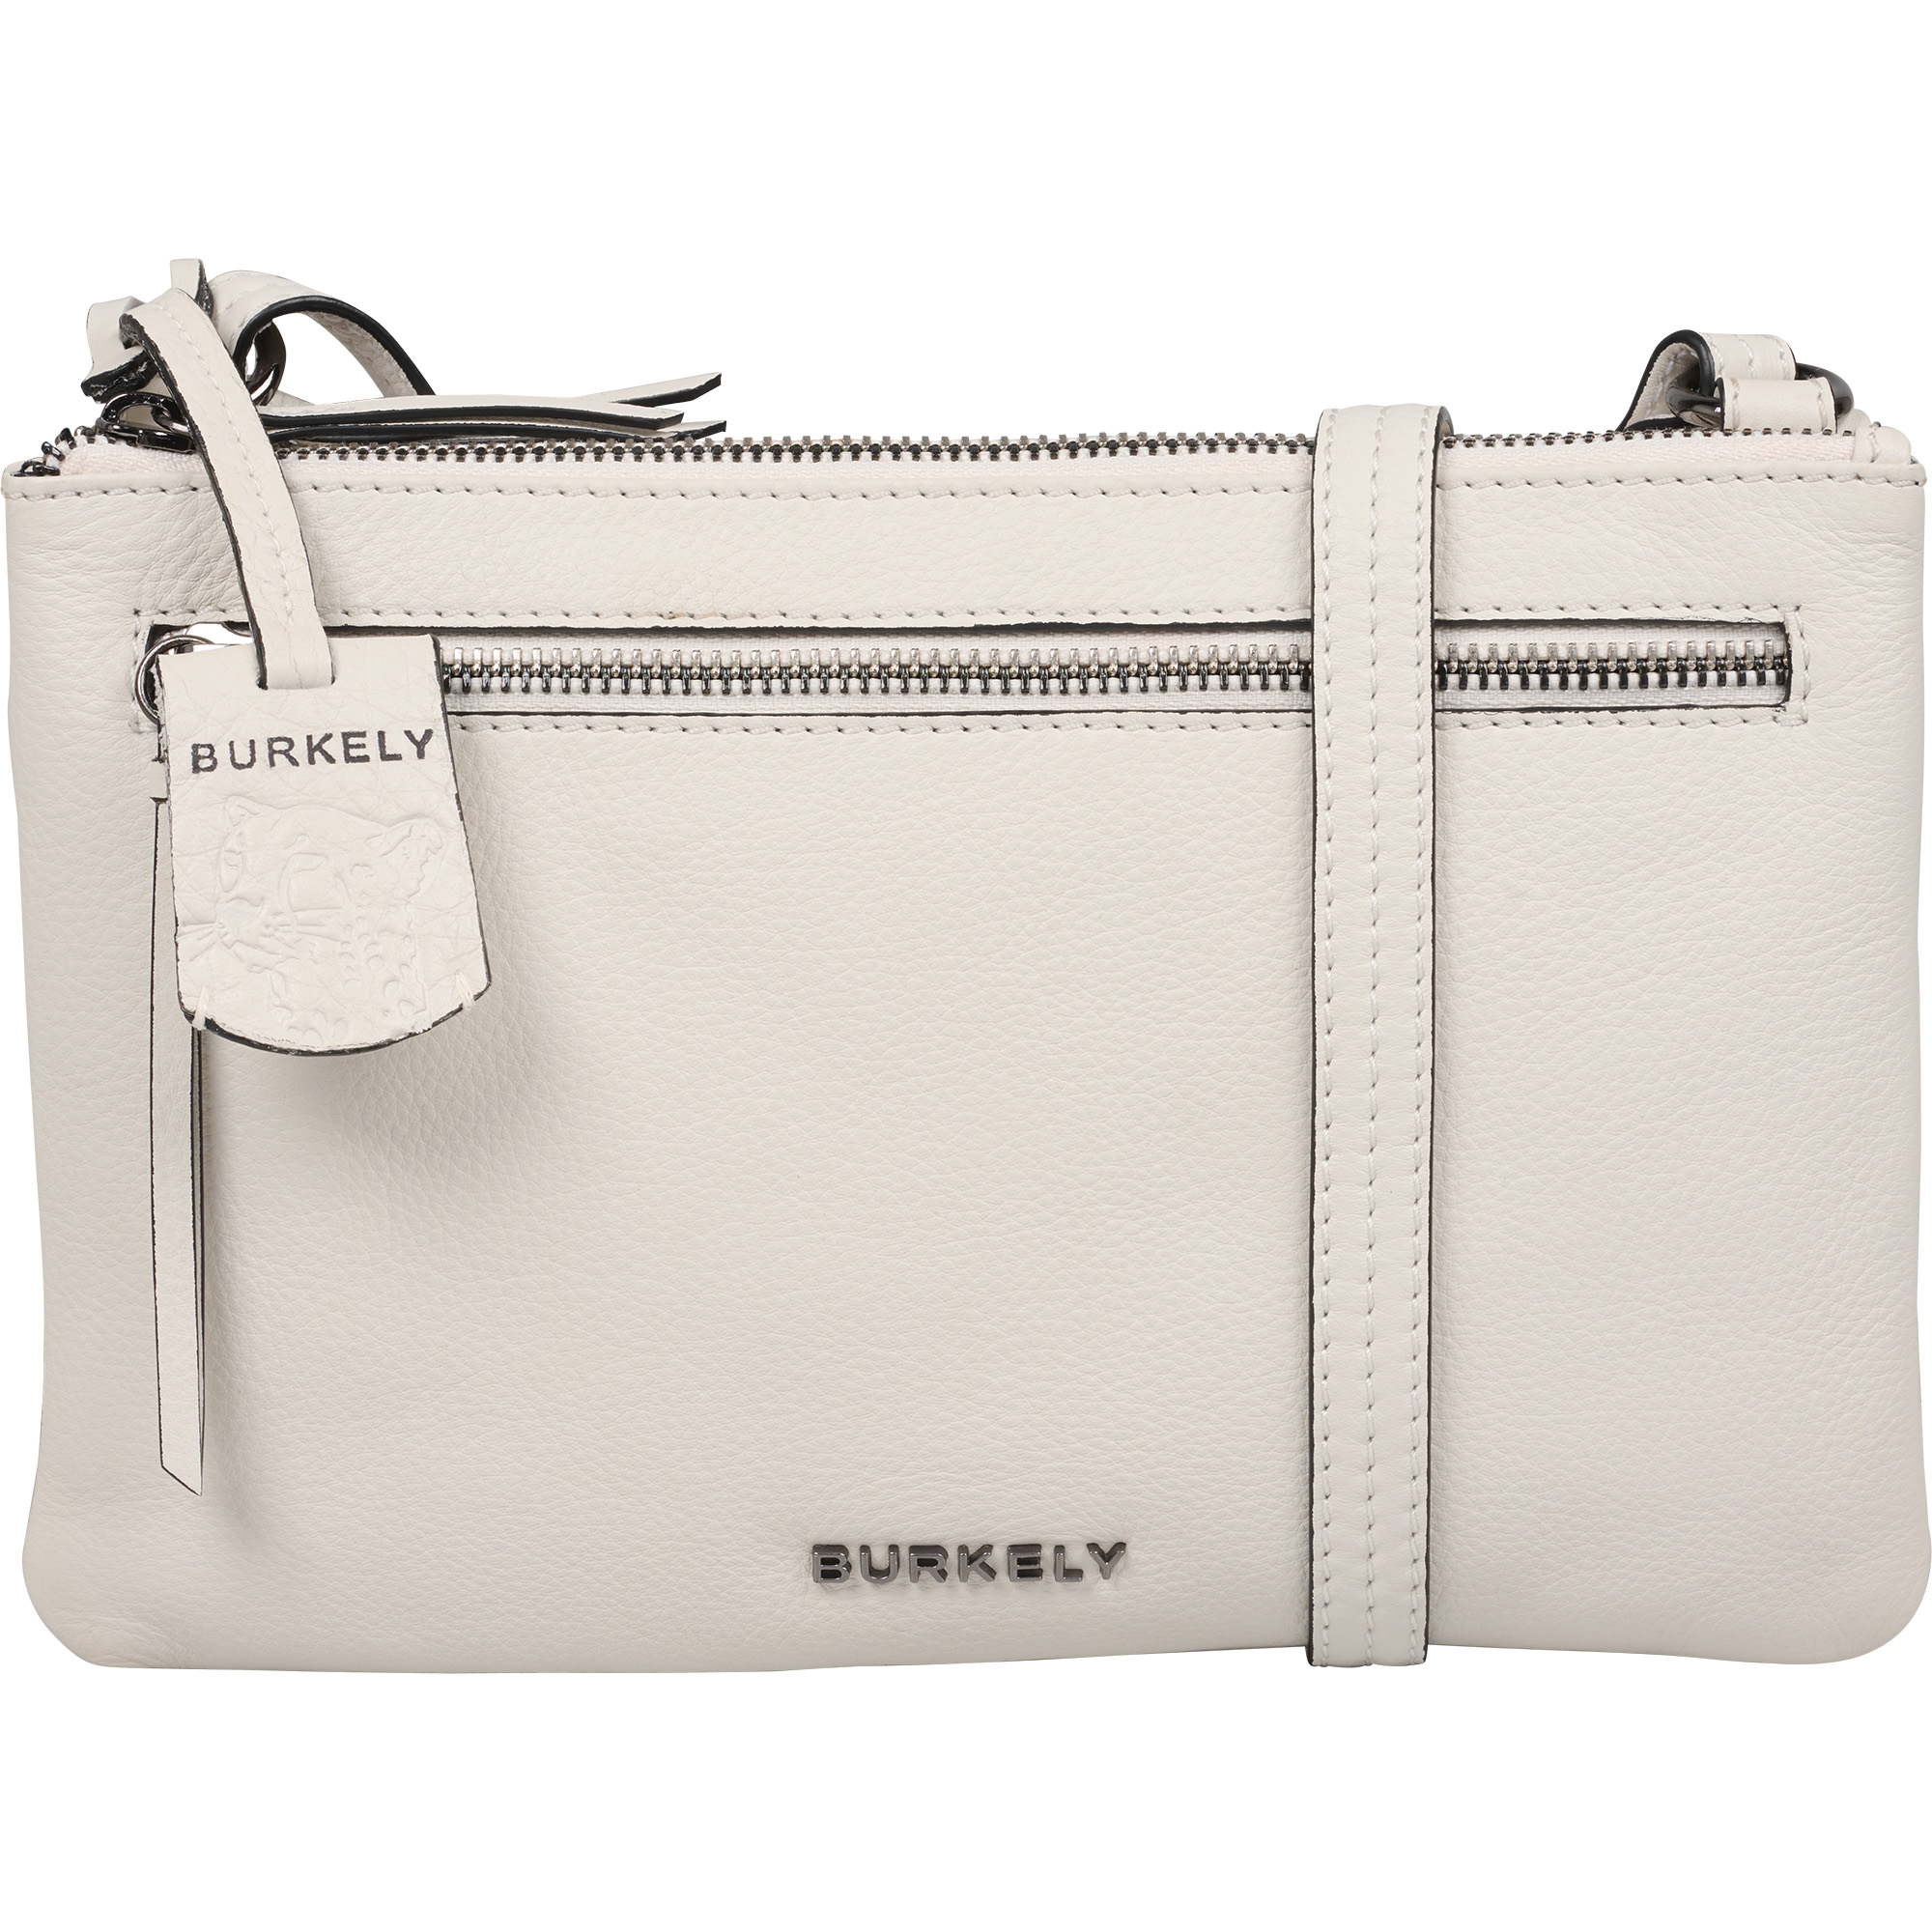 Burkely 1000716 Double Pocket Bag 64.01 Off White